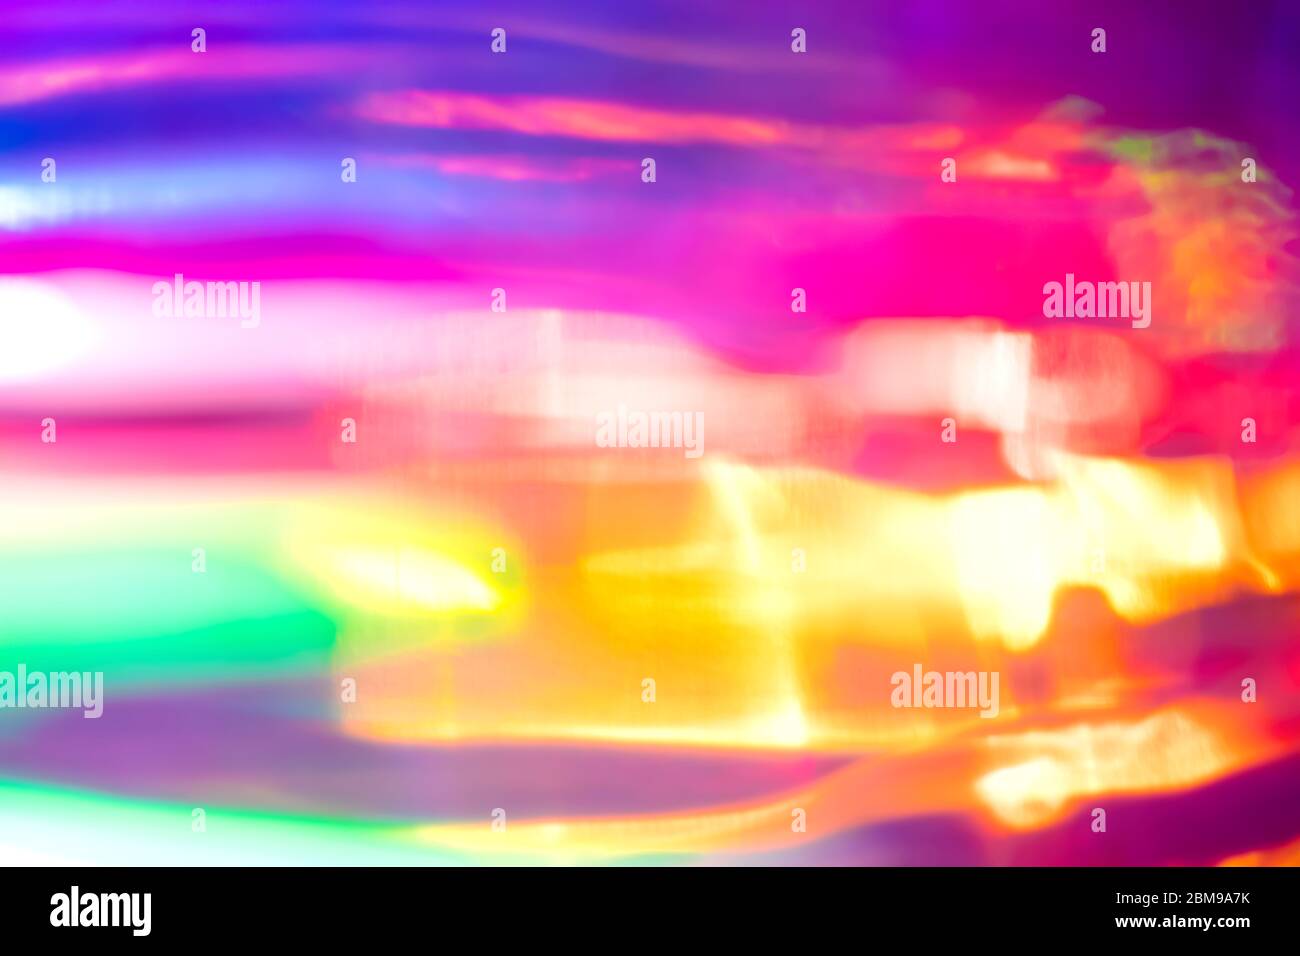 Abstract party club background of horizontal gradient lens blur light  streaks with gradient vibrant neon colors Stock Photo - Alamy